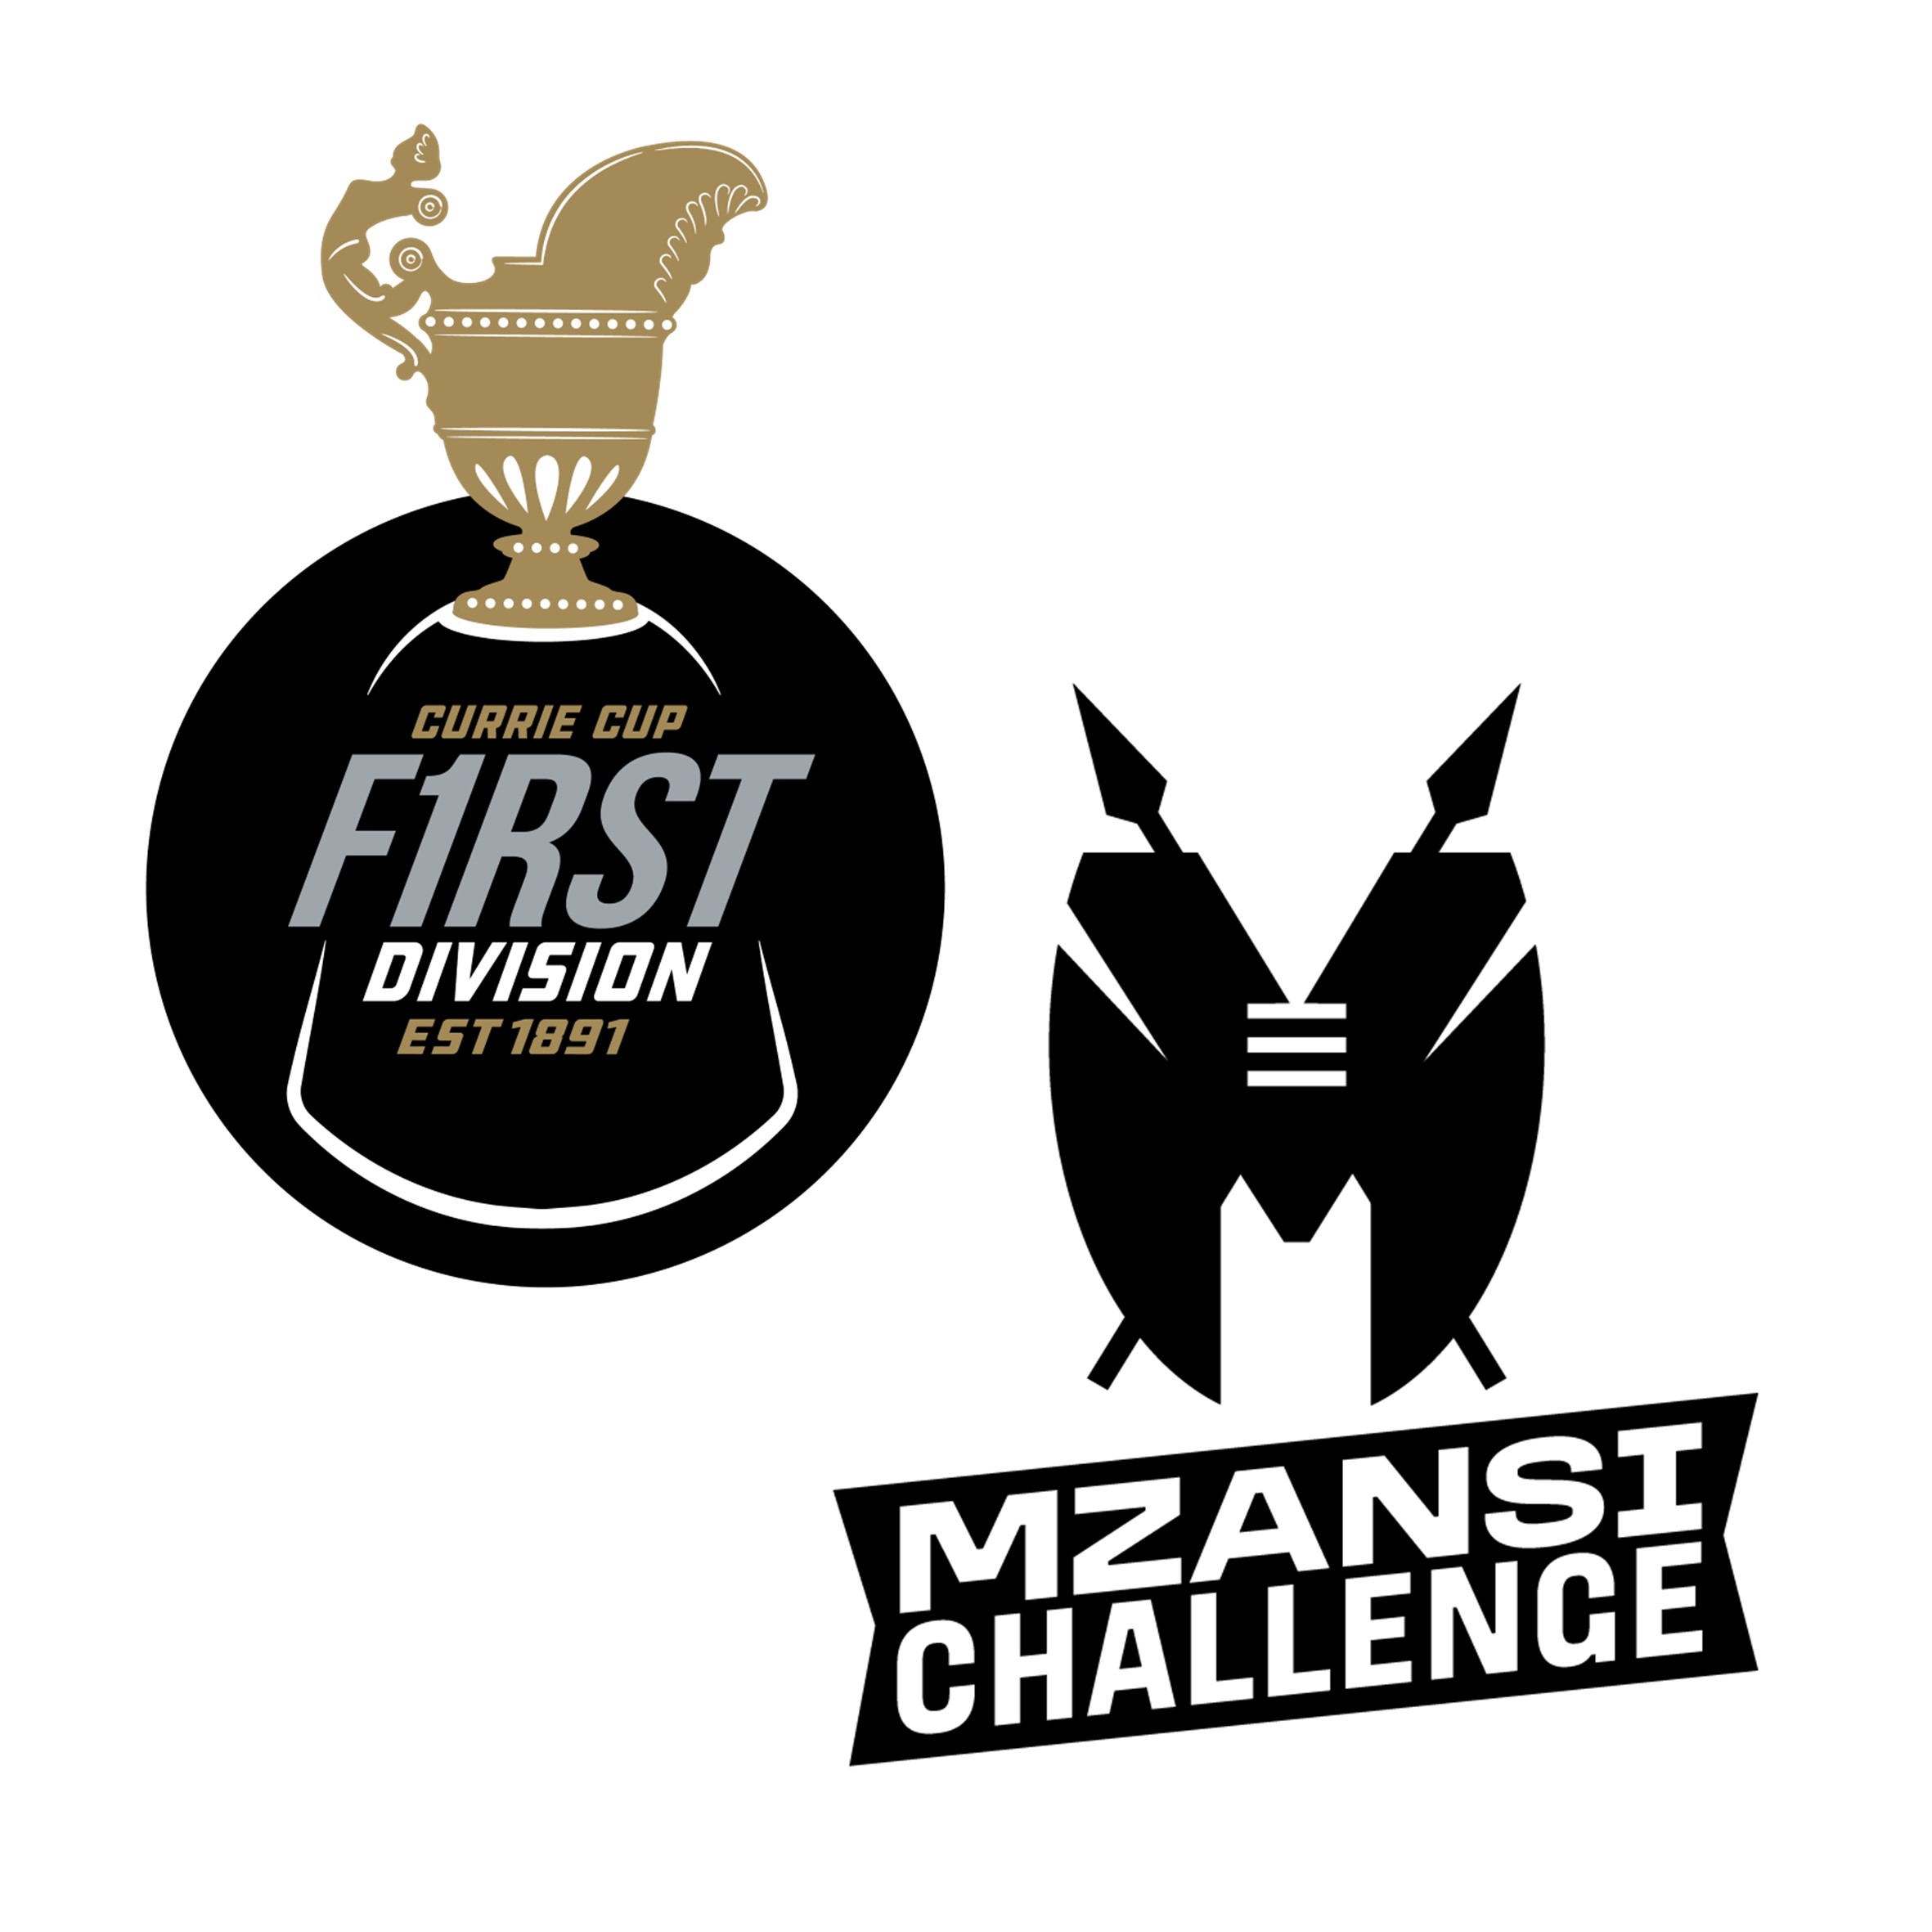 CURRIE CUP FIRST DIVISION | MZANSI CHALLENGE